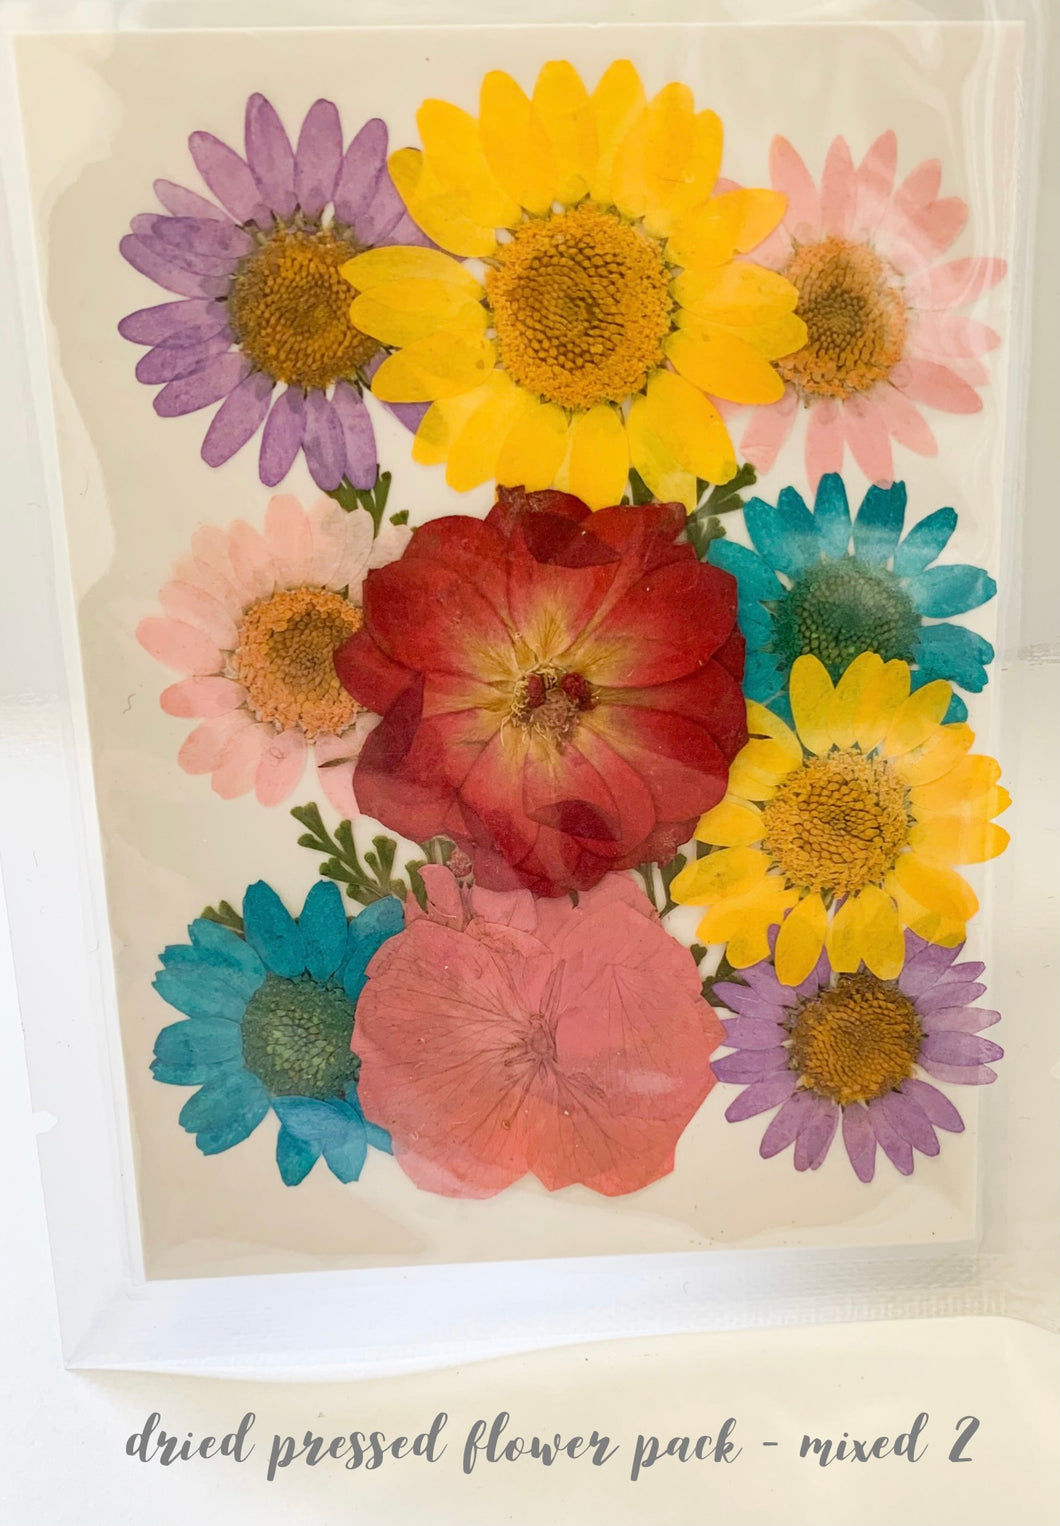 Small Dried Pressed Flower Pack - Mixed 2